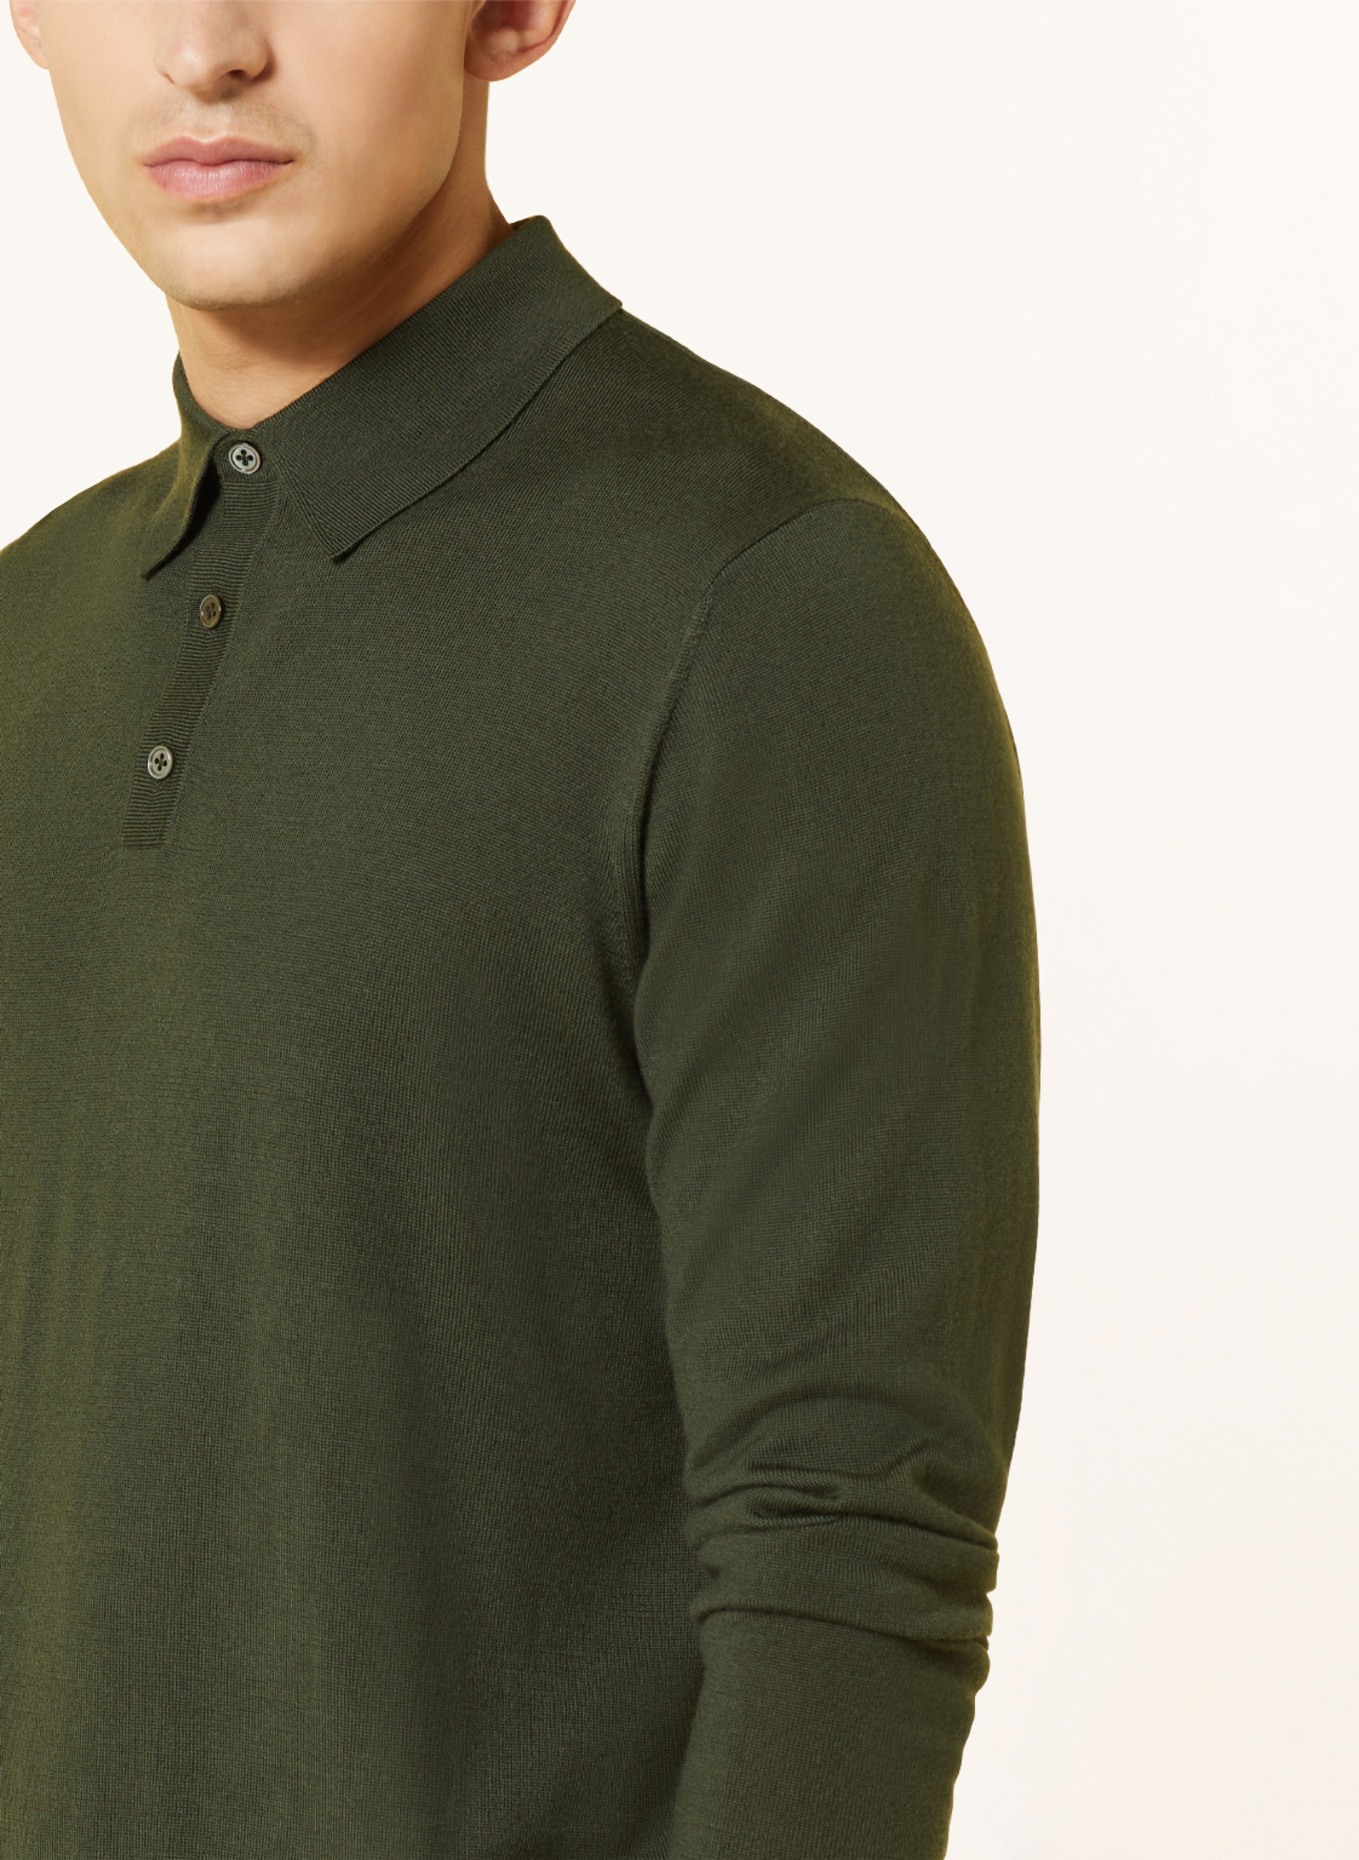 STROKESMAN'S Knitted polo shirt made of merino wool, Color: OLIVE (Image 4)